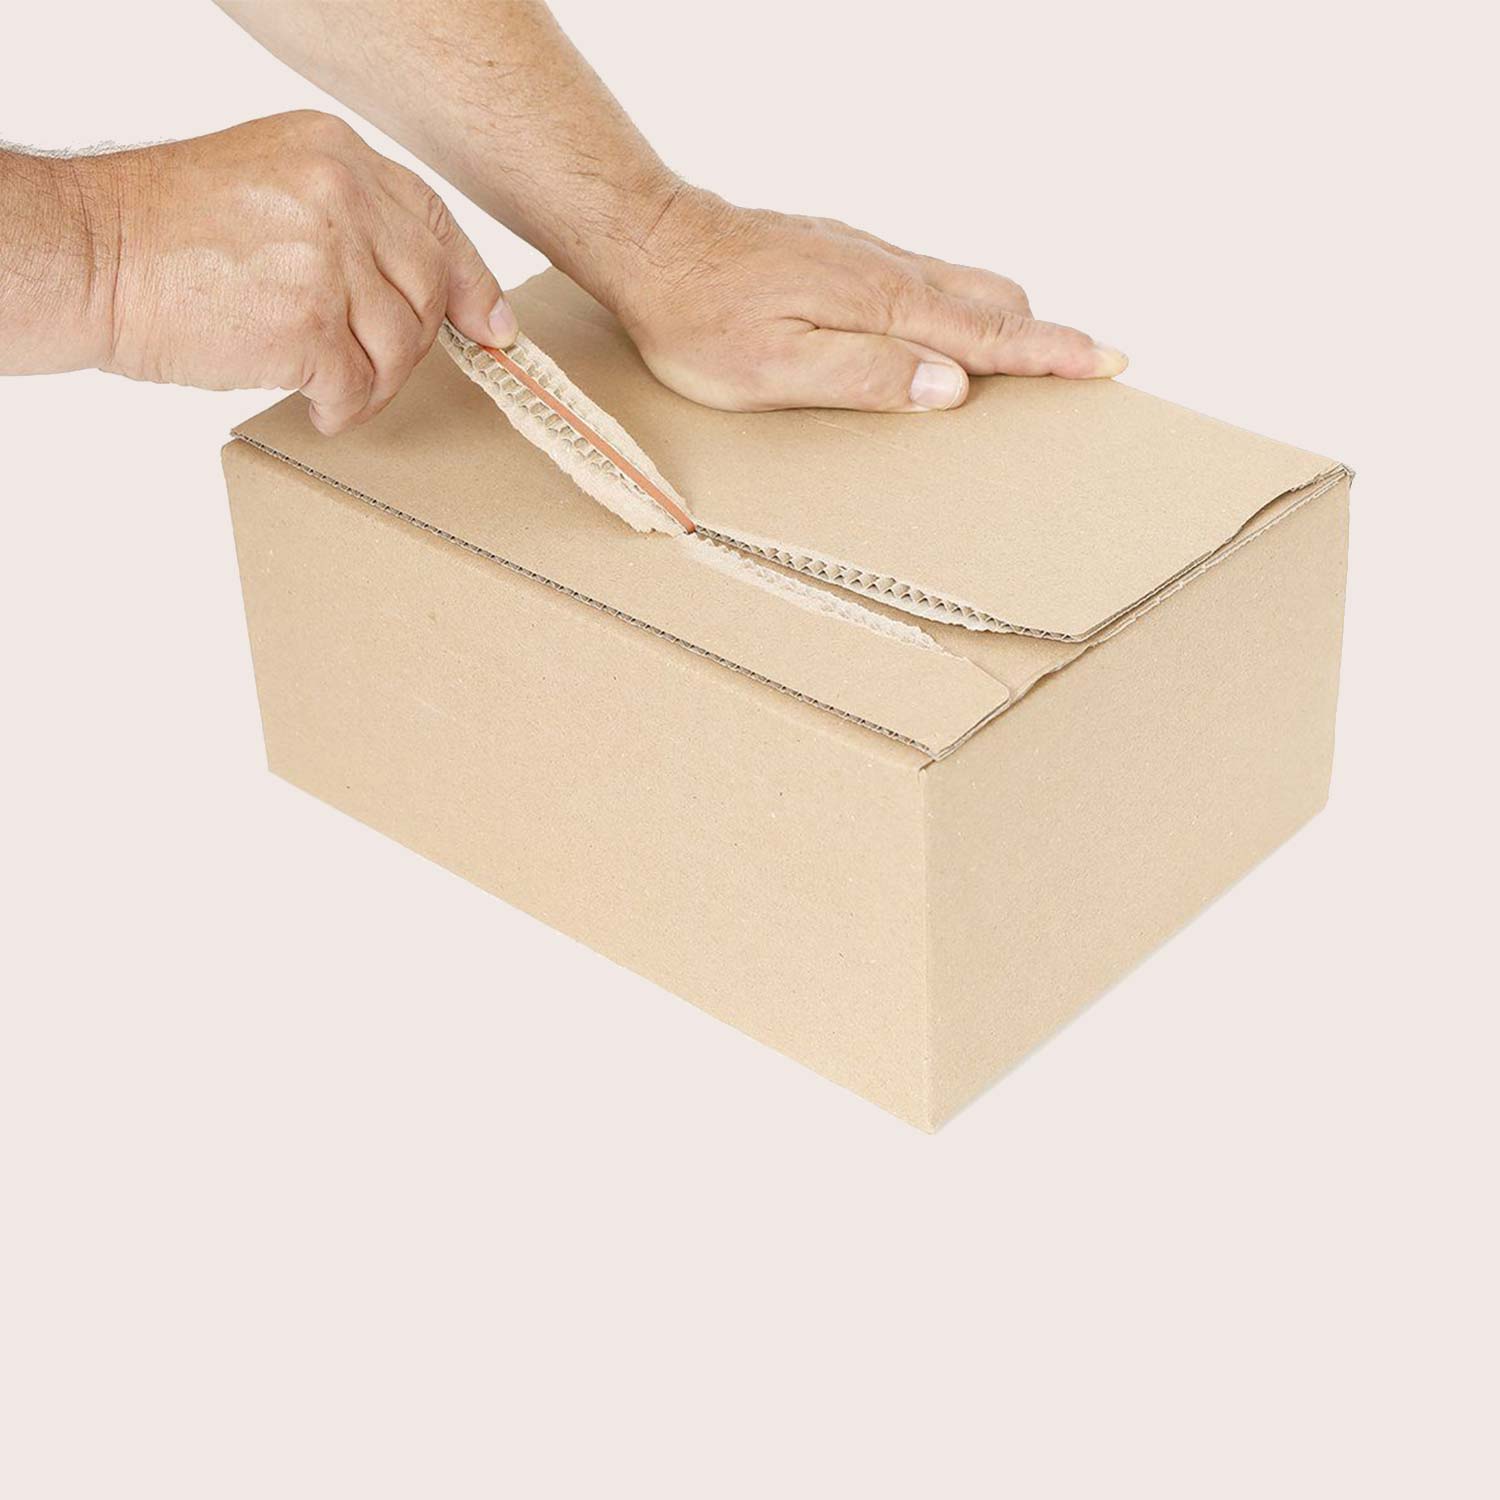 Opening a cardboard box with an automatic base